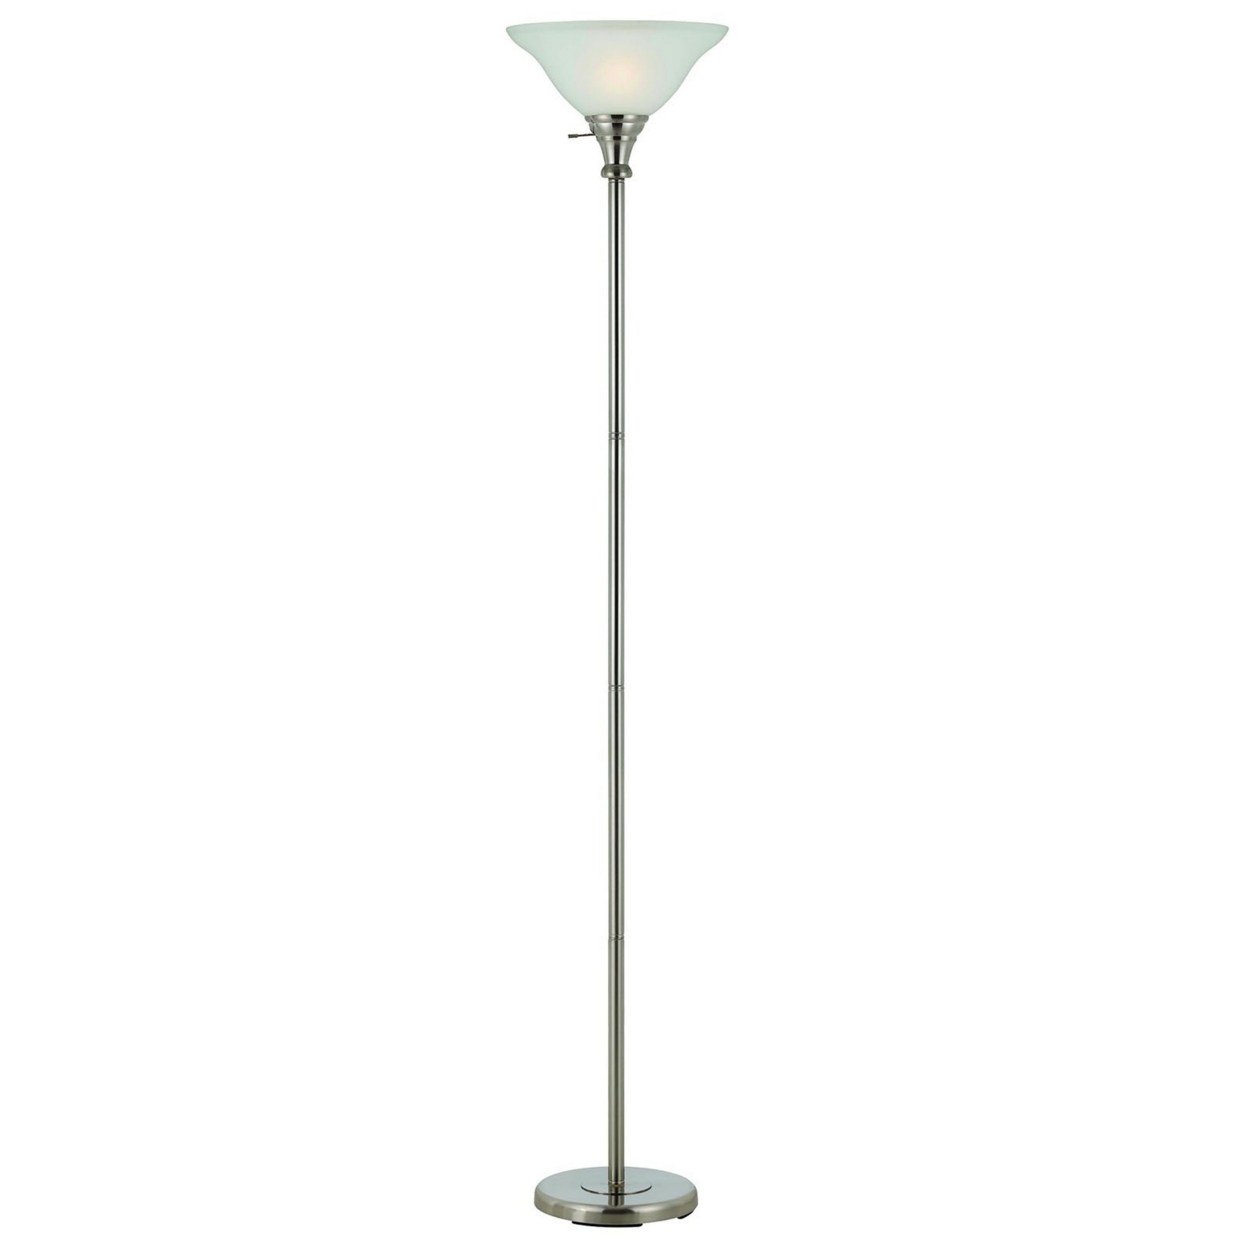 Metal Round 3 Way Torchiere Lamp With Frosted Glass Shade, Silver And White- Saltoro Sherpi